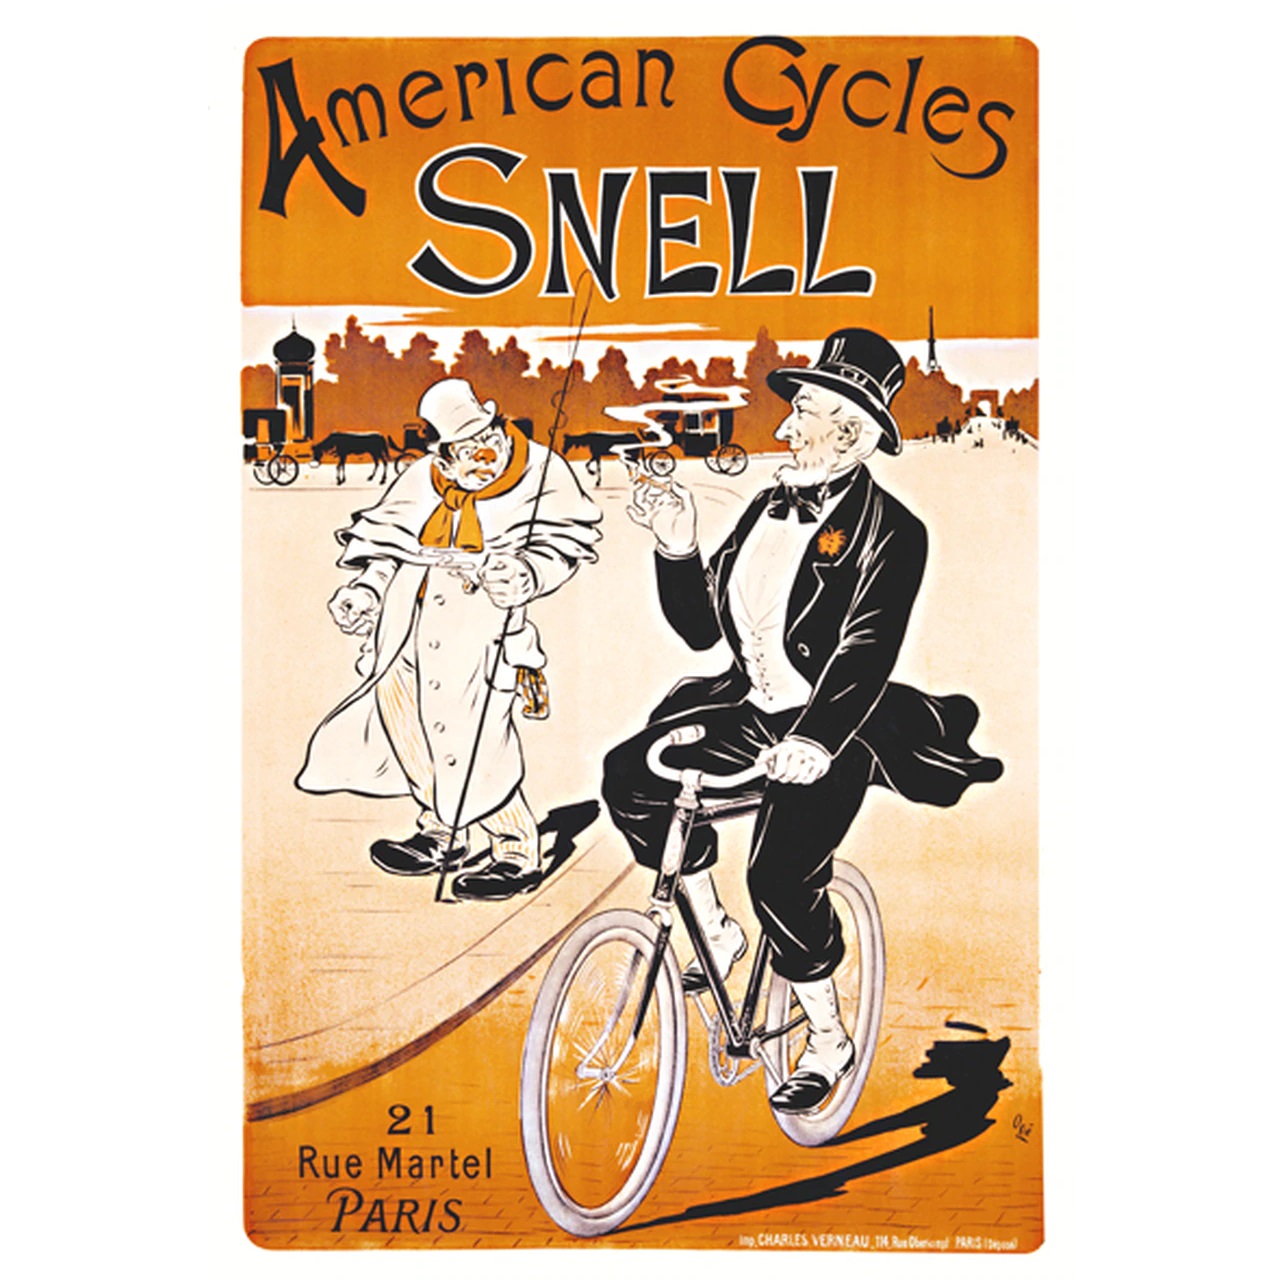 American Cycles Snell Bicycle Poster Vintage Bicycling Art Poster By Eugene Oge